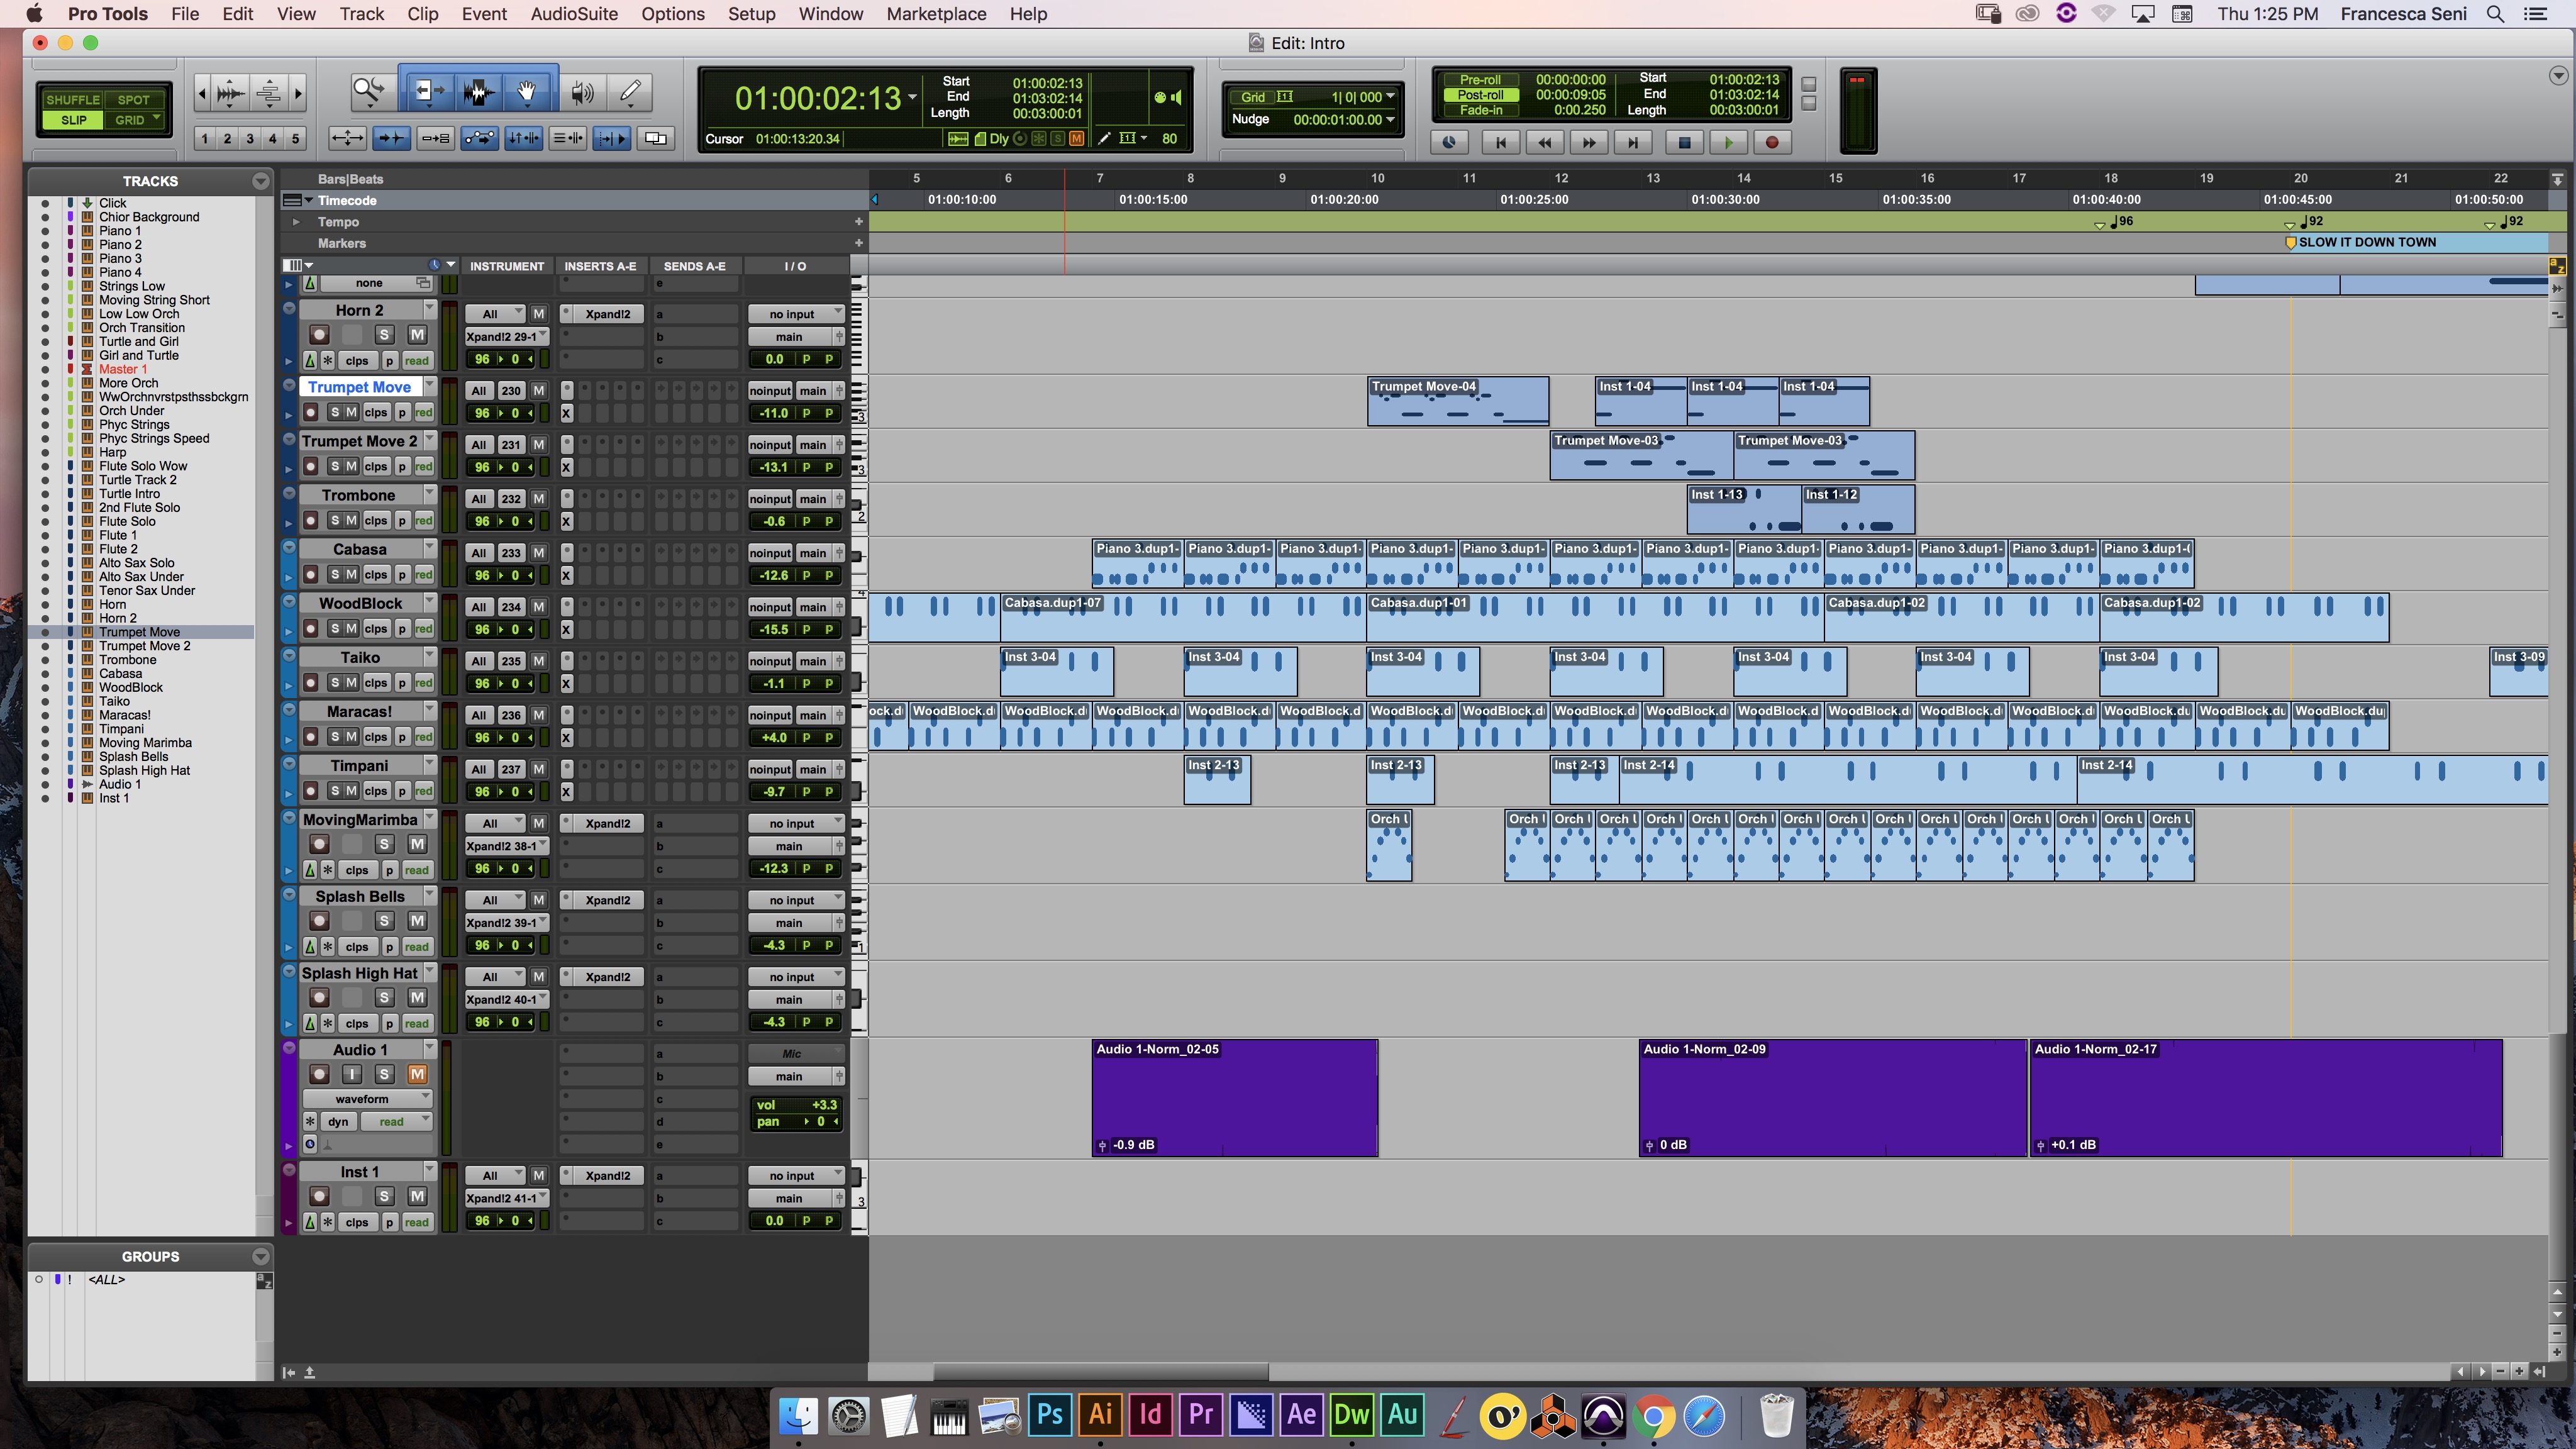 This is a screenshot of the Pro Tools that shows how I mixed audio clips with the soundtrack